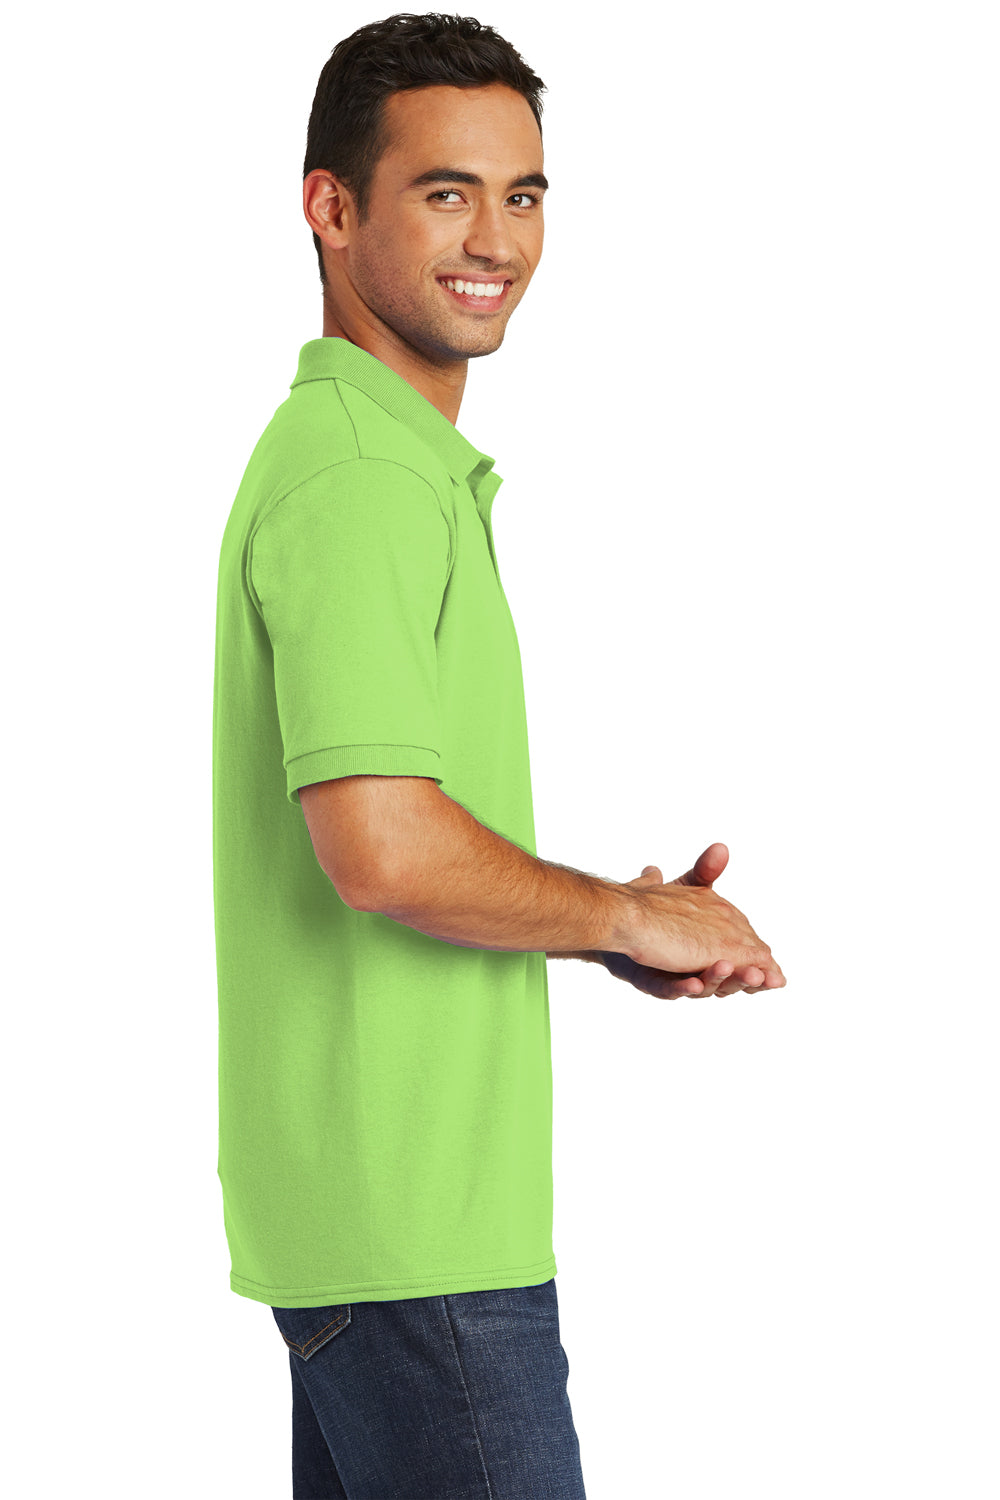 Port & Company KP55 Mens Core Stain Resistant Short Sleeve Polo Shirt Lime Green Side